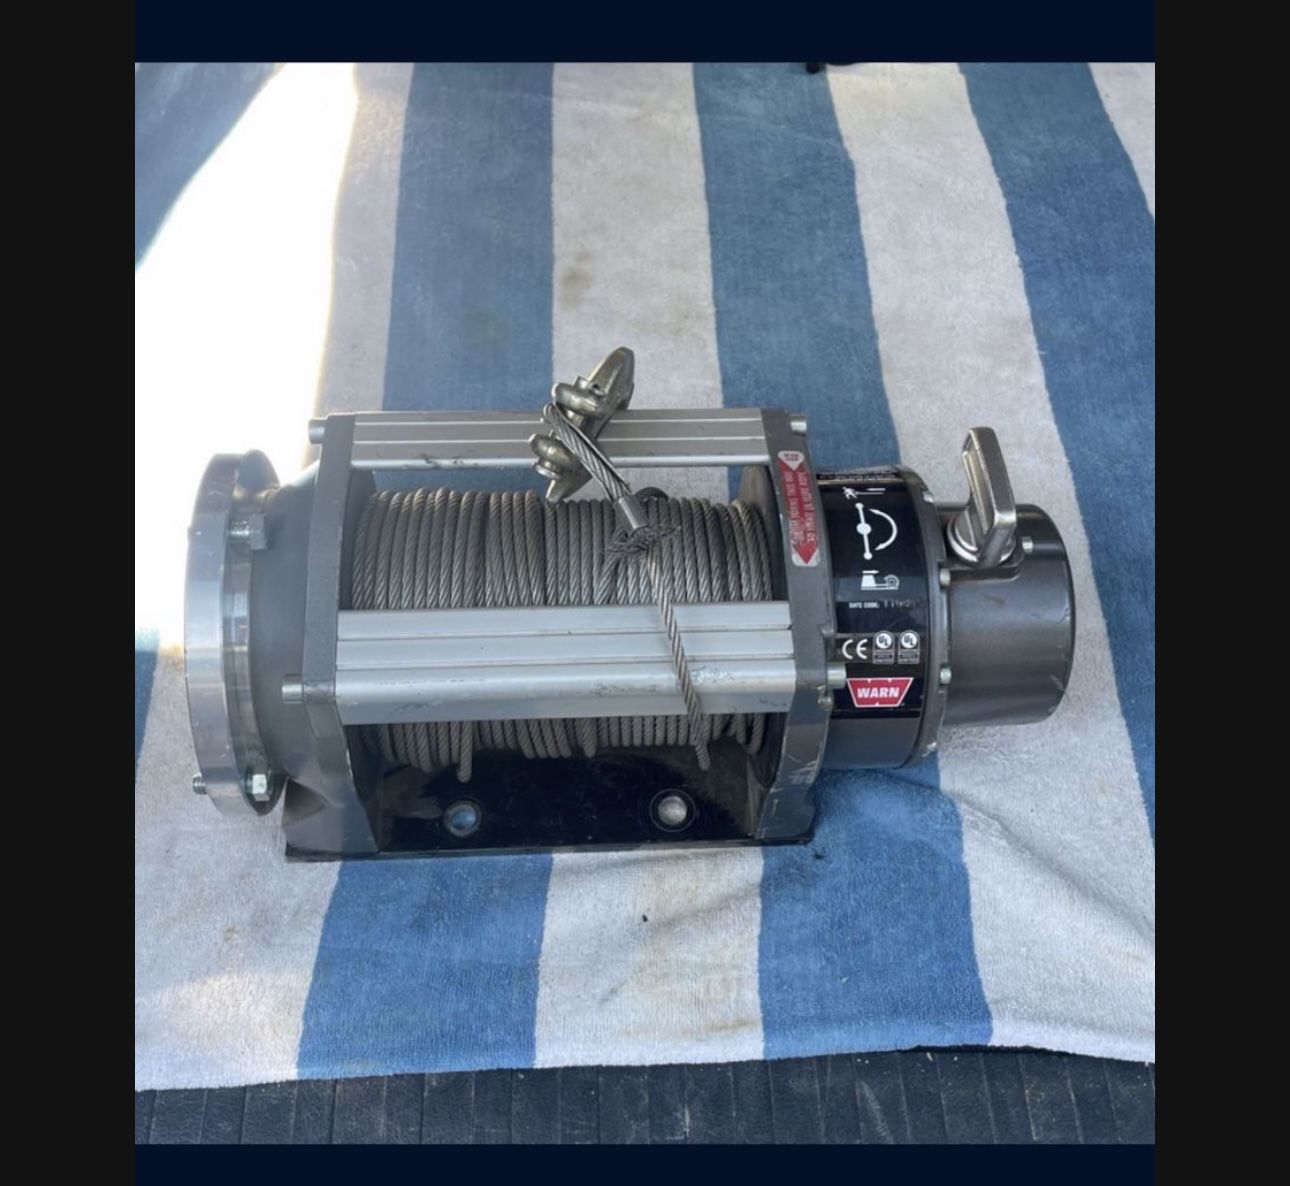 Warn Auto Commercial Winch No Motor Included